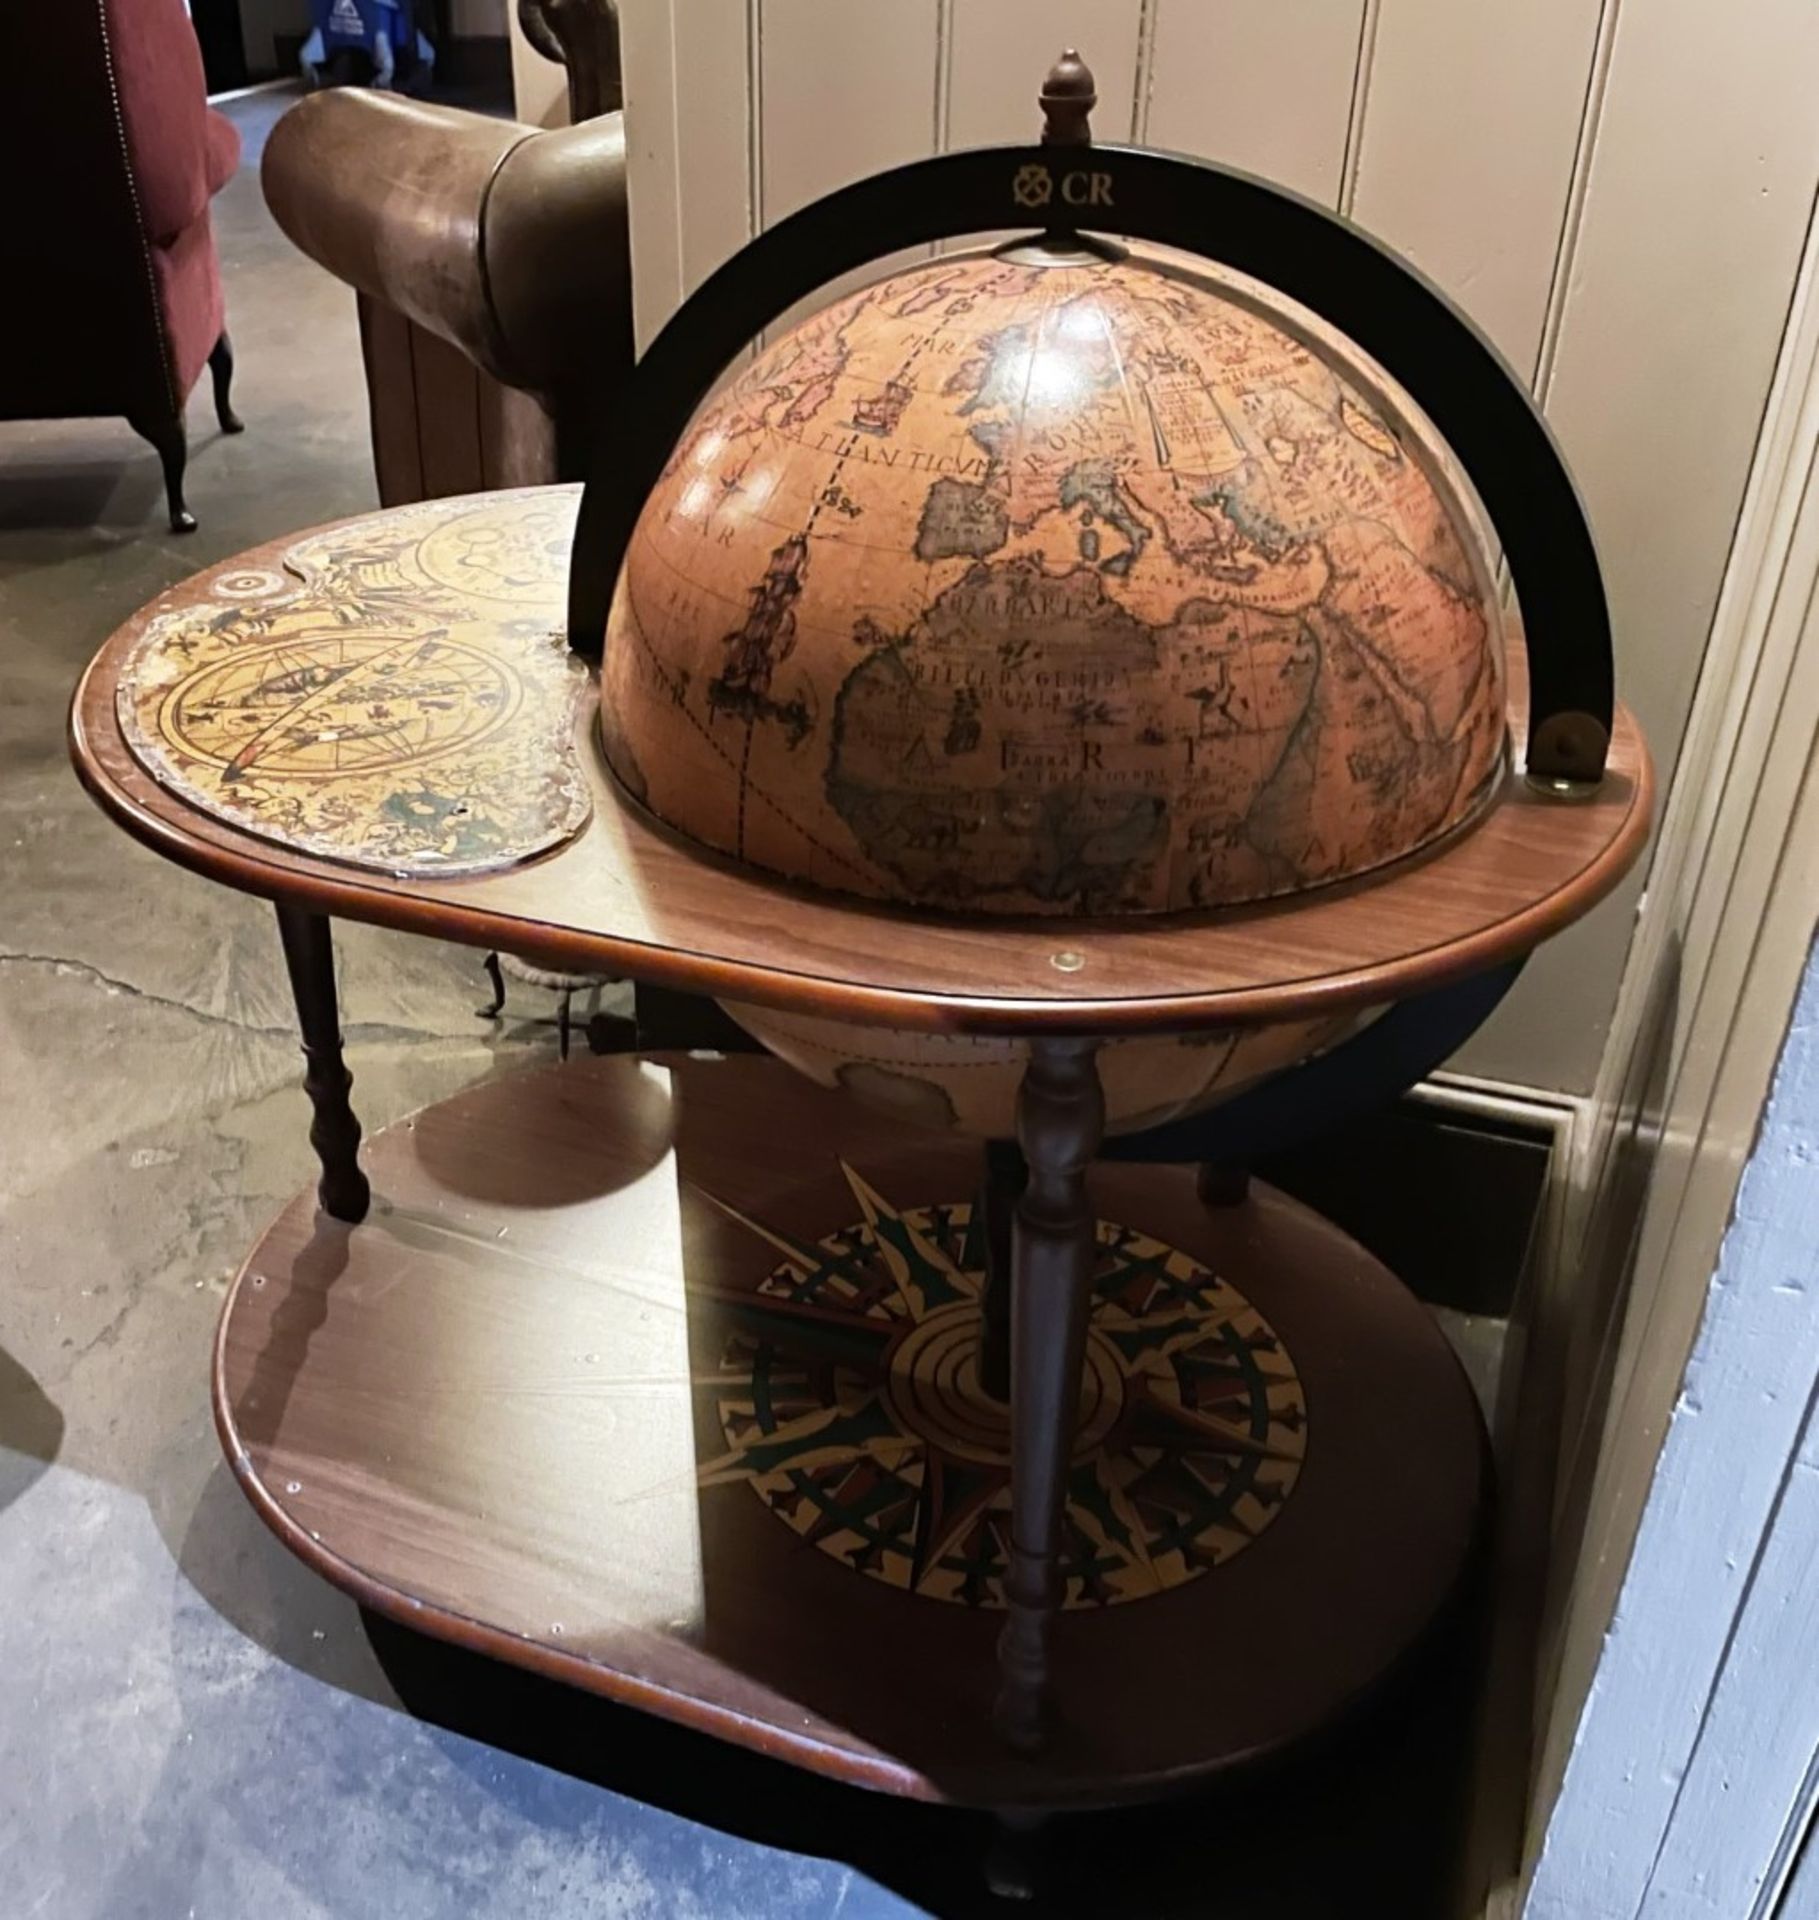 1 x Vintage Italian Freestanding Oval Globe Drinks Cabinet Mini Wine Bar with an Antique Aesthetic - Image 4 of 12